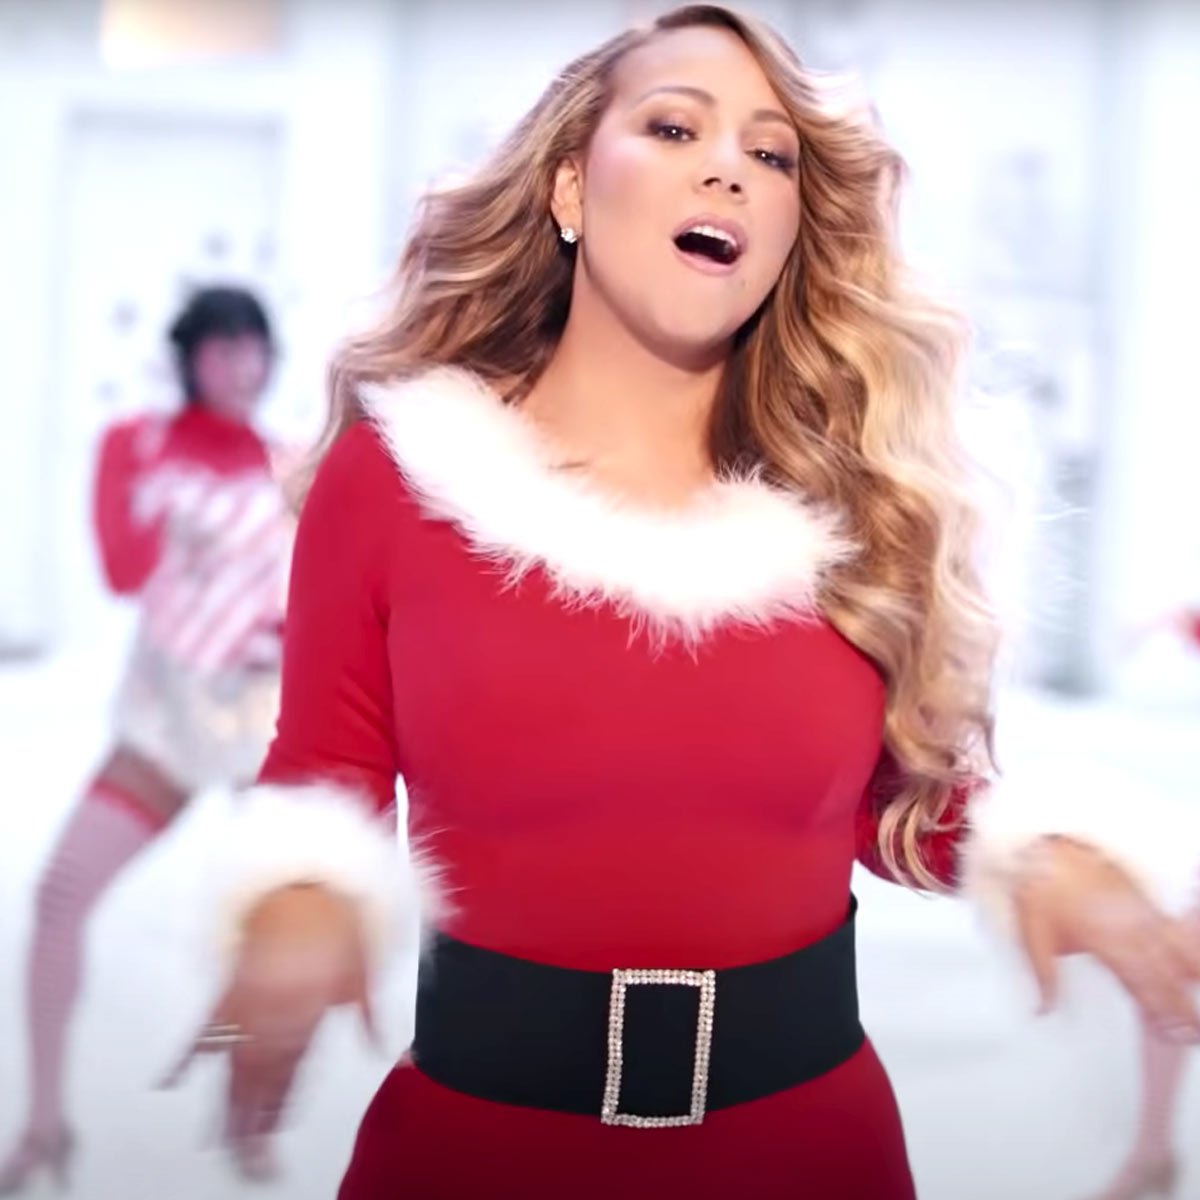 All I Want For Christmas Is You - Mariah Carey Sheet music for